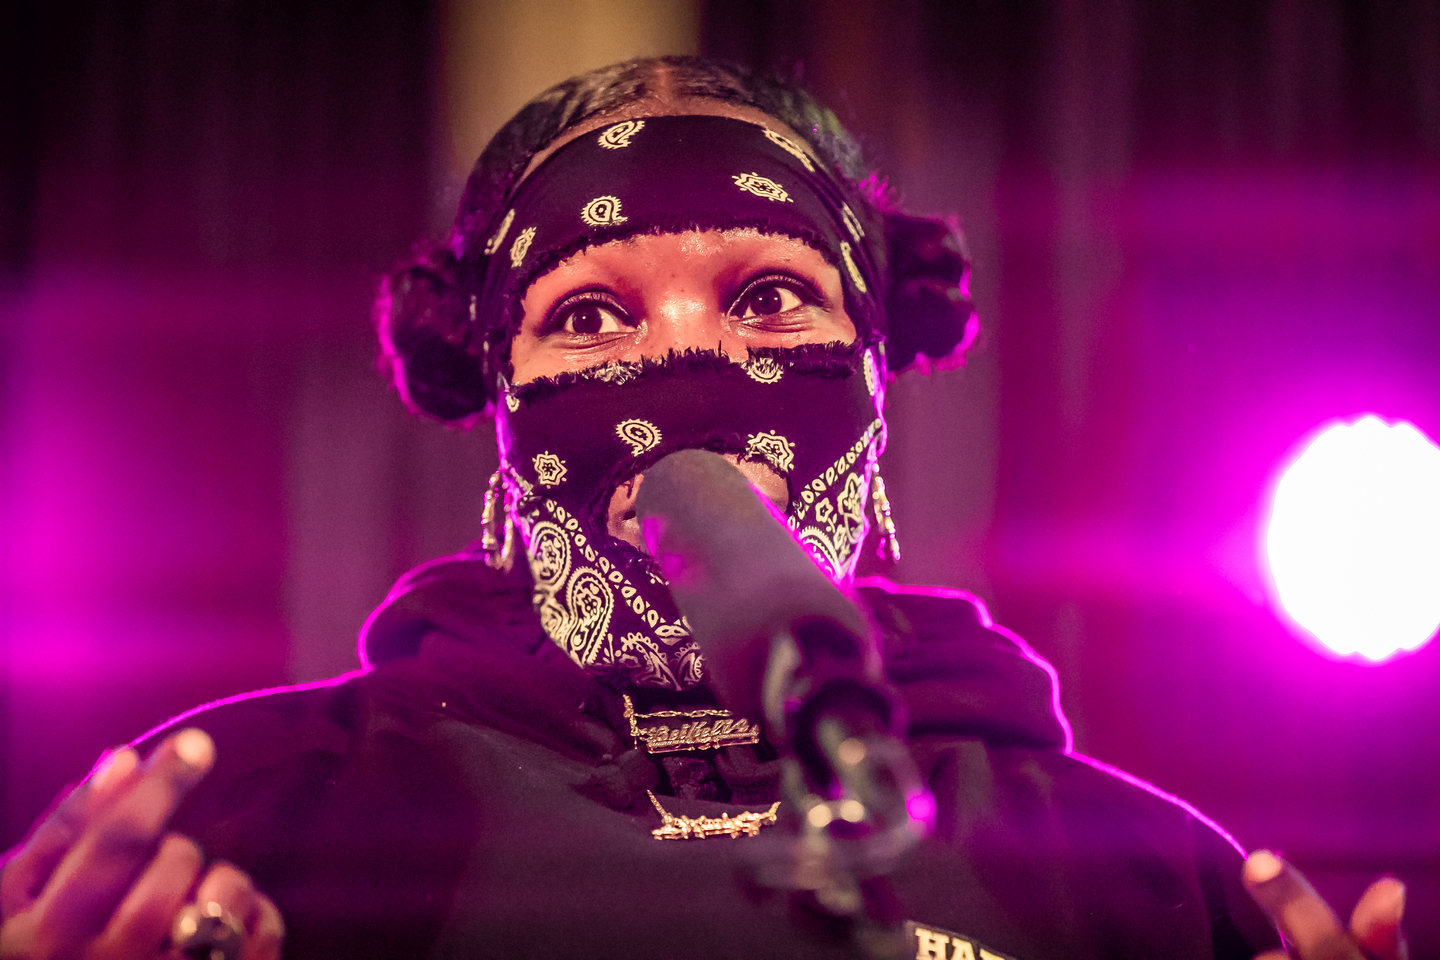 Leikeli47 performs onstage at NPR Tiny Desk Concert at Central Presbyterian Church.